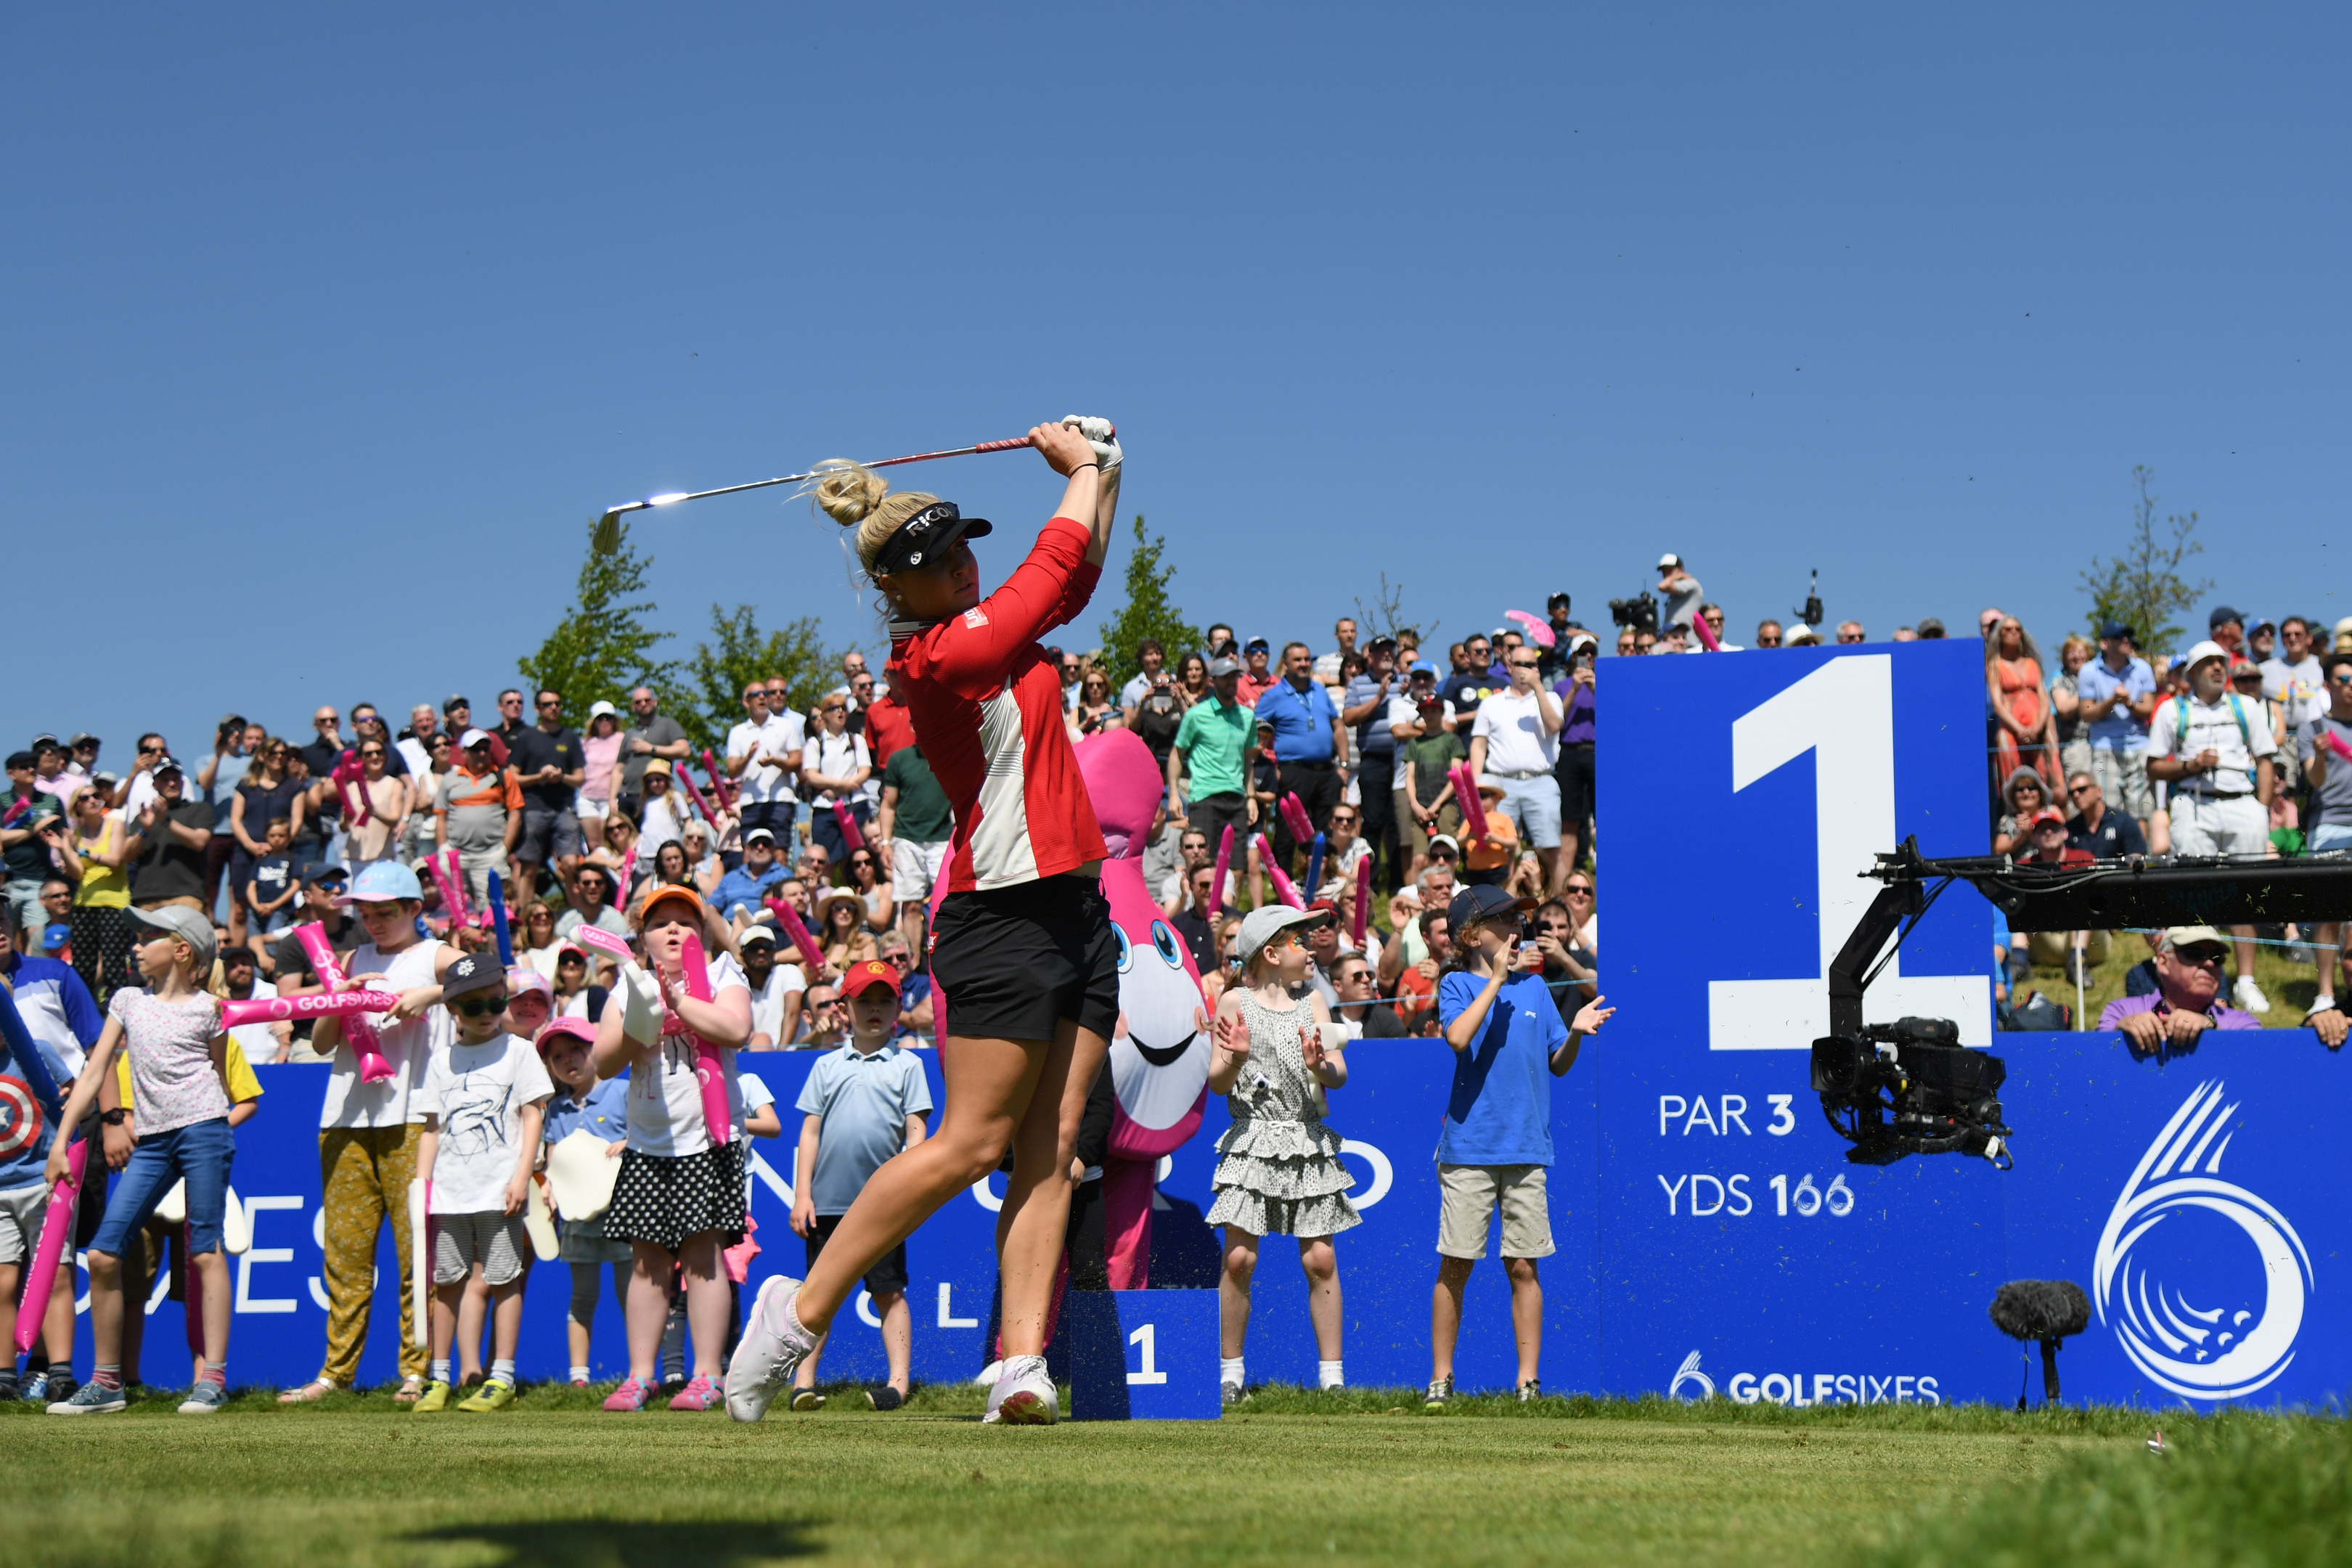 Charley Hull tees off in front of big crowds at the GolfSixes but England's women lost to eventual champions Ireland.